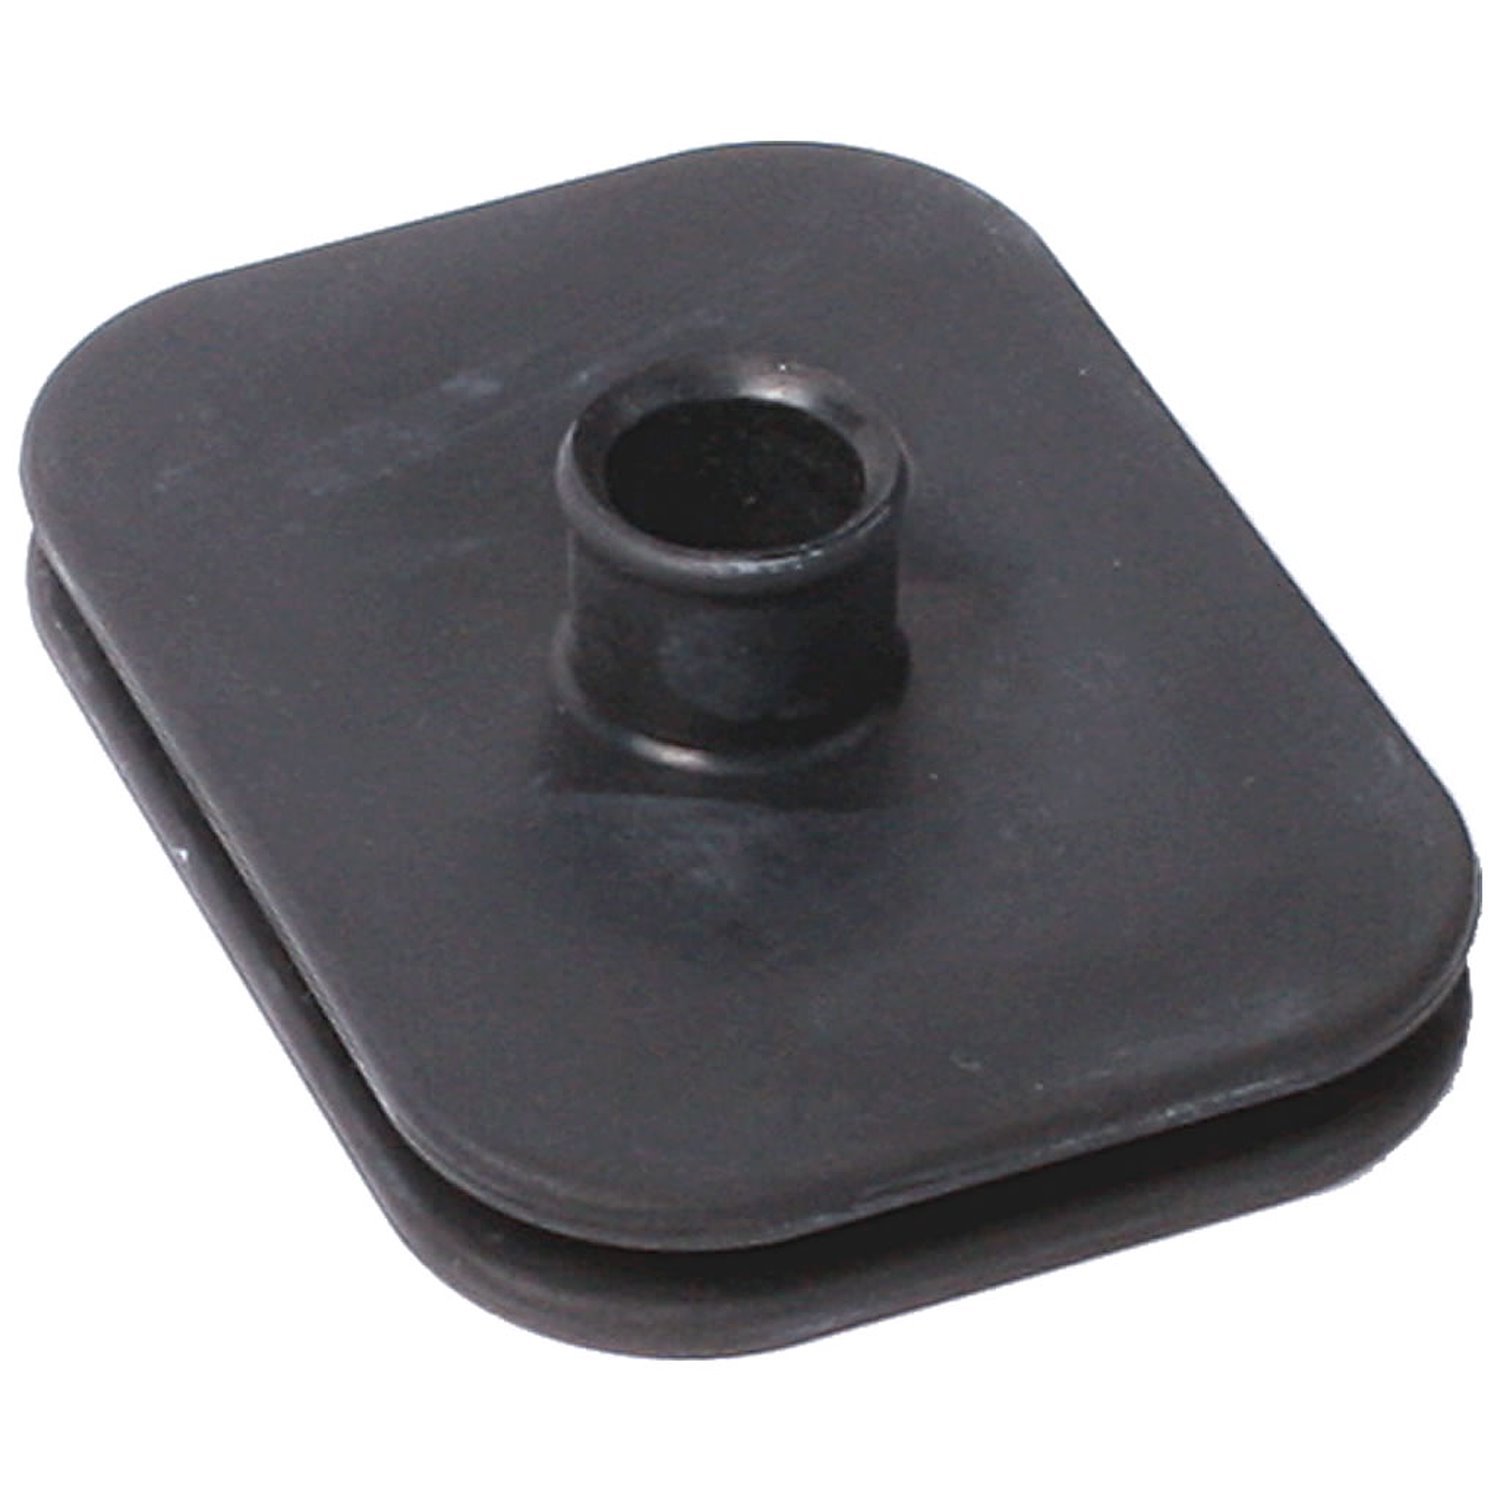 Hydraulic Boot for Chevy 621 Bellhousing with Hydraulics